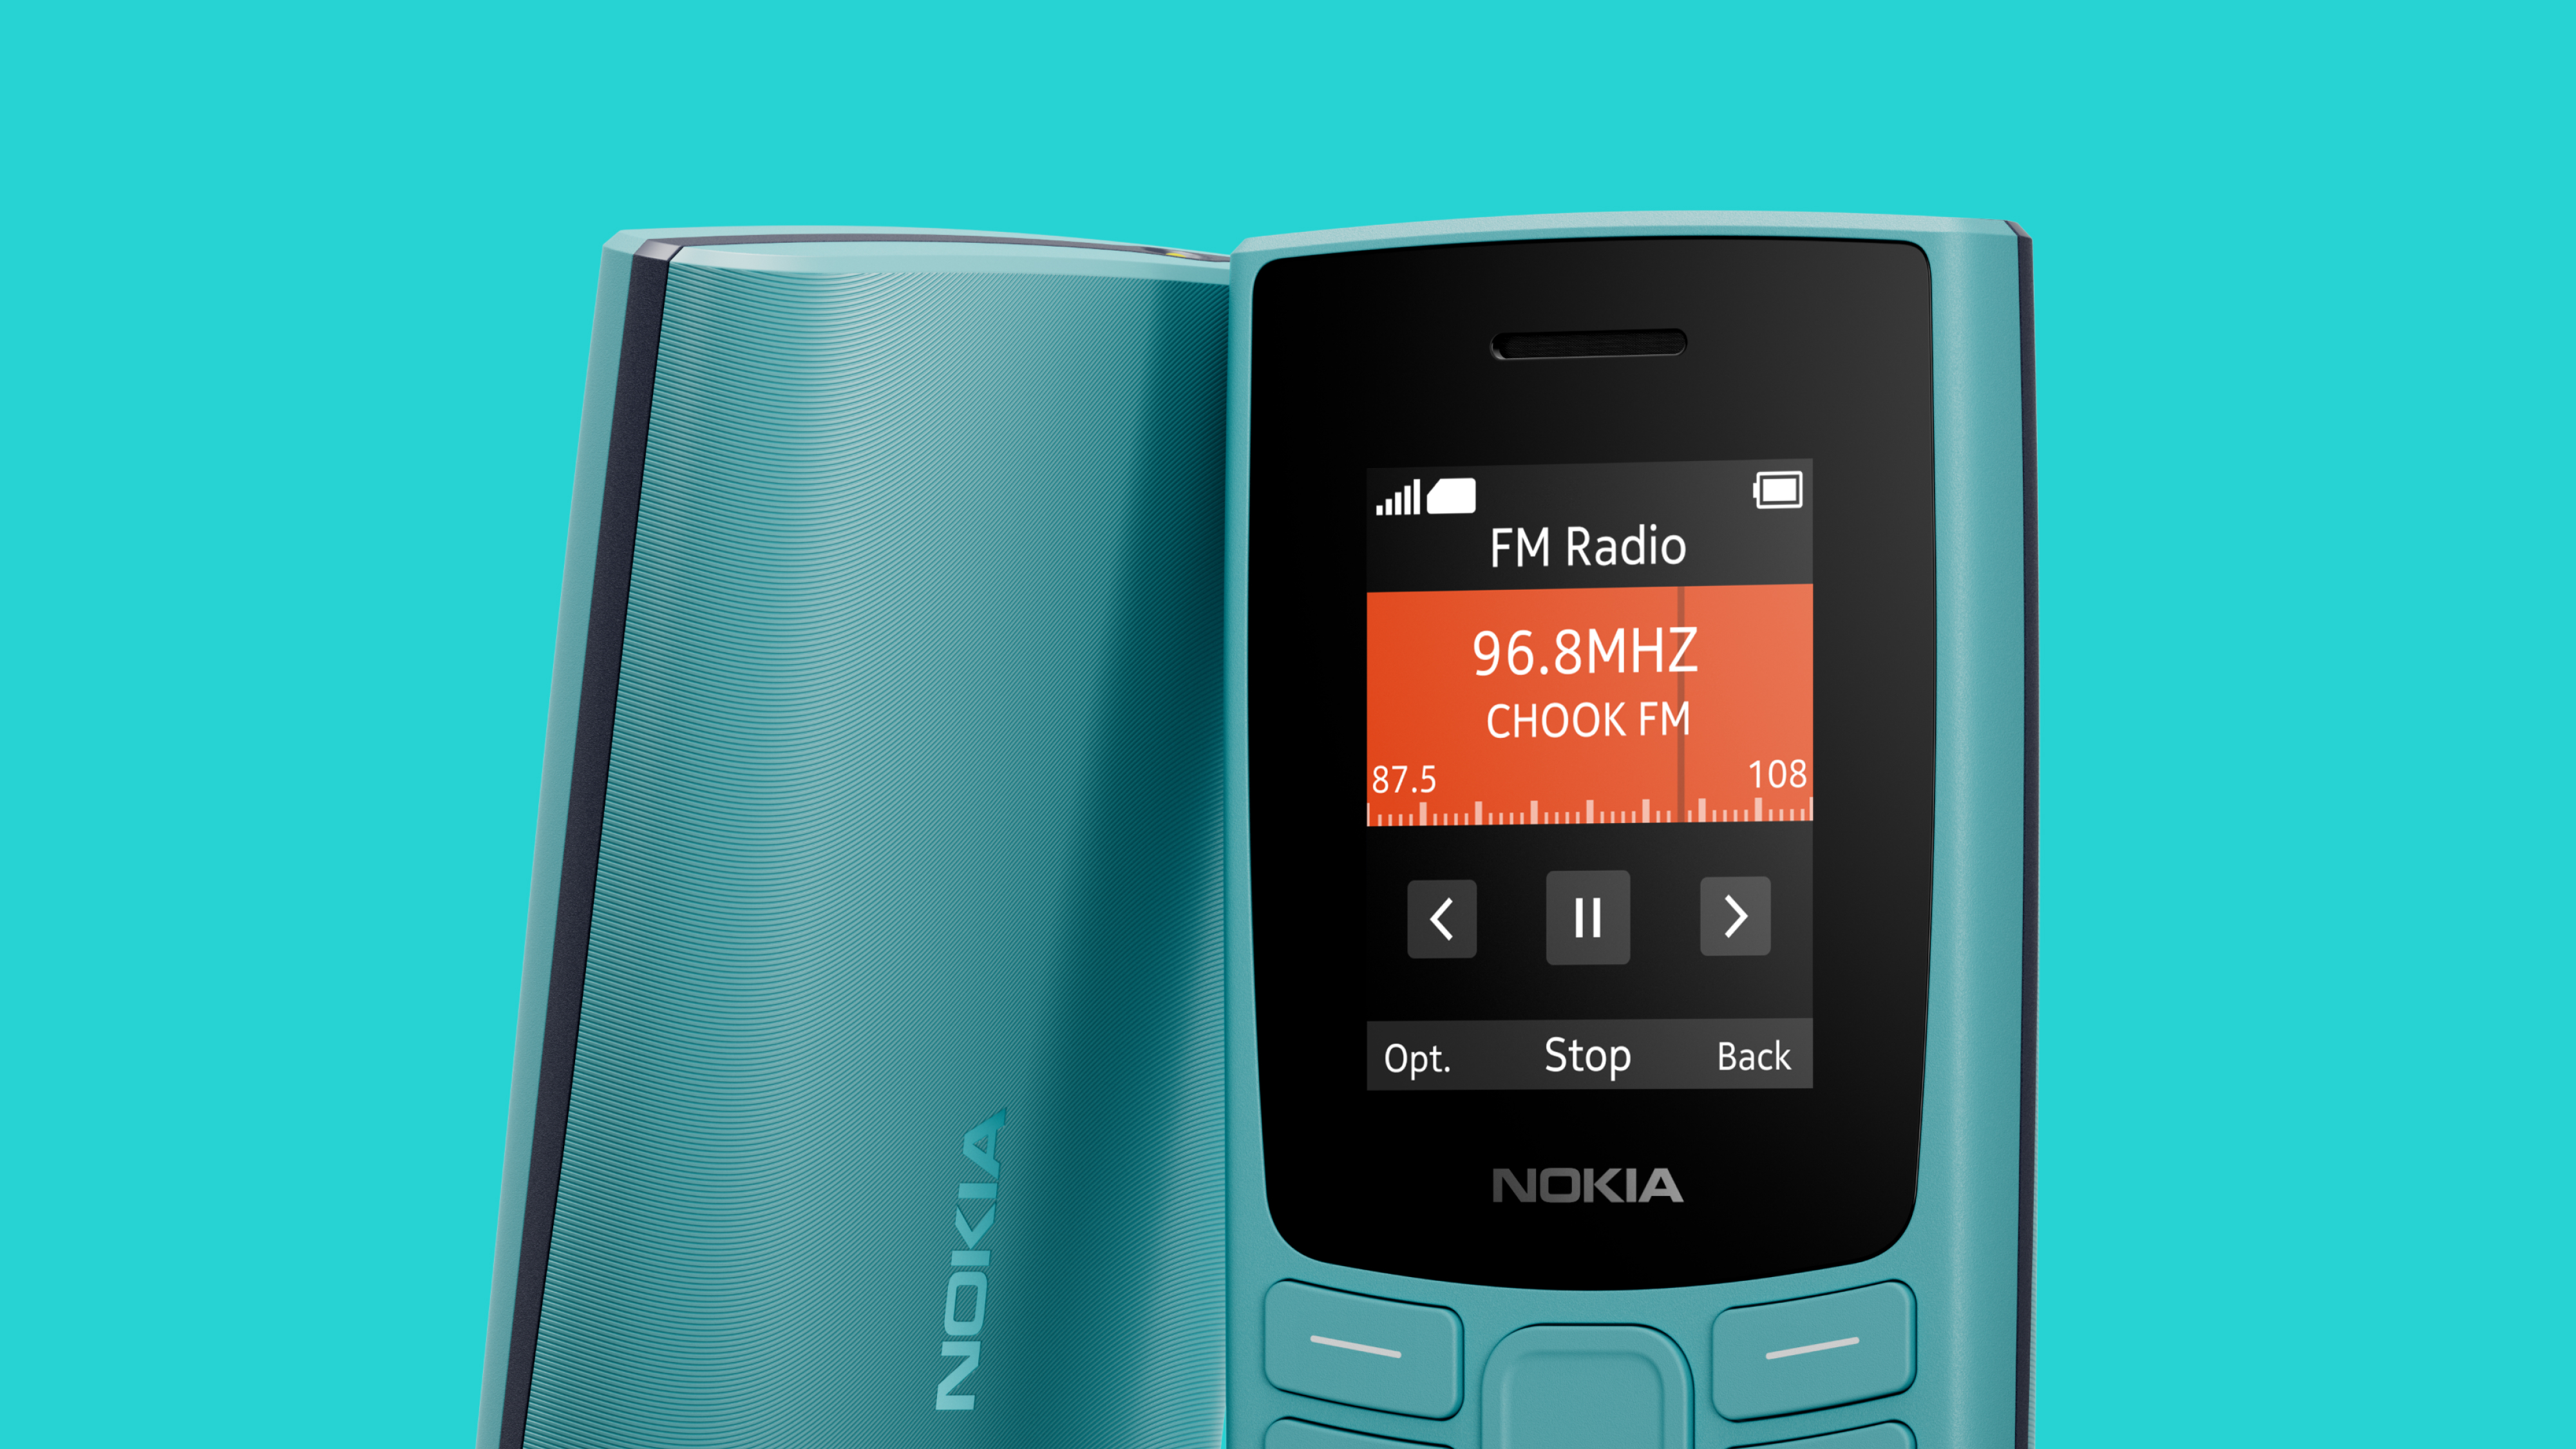 The new Nokia 105 feature phone